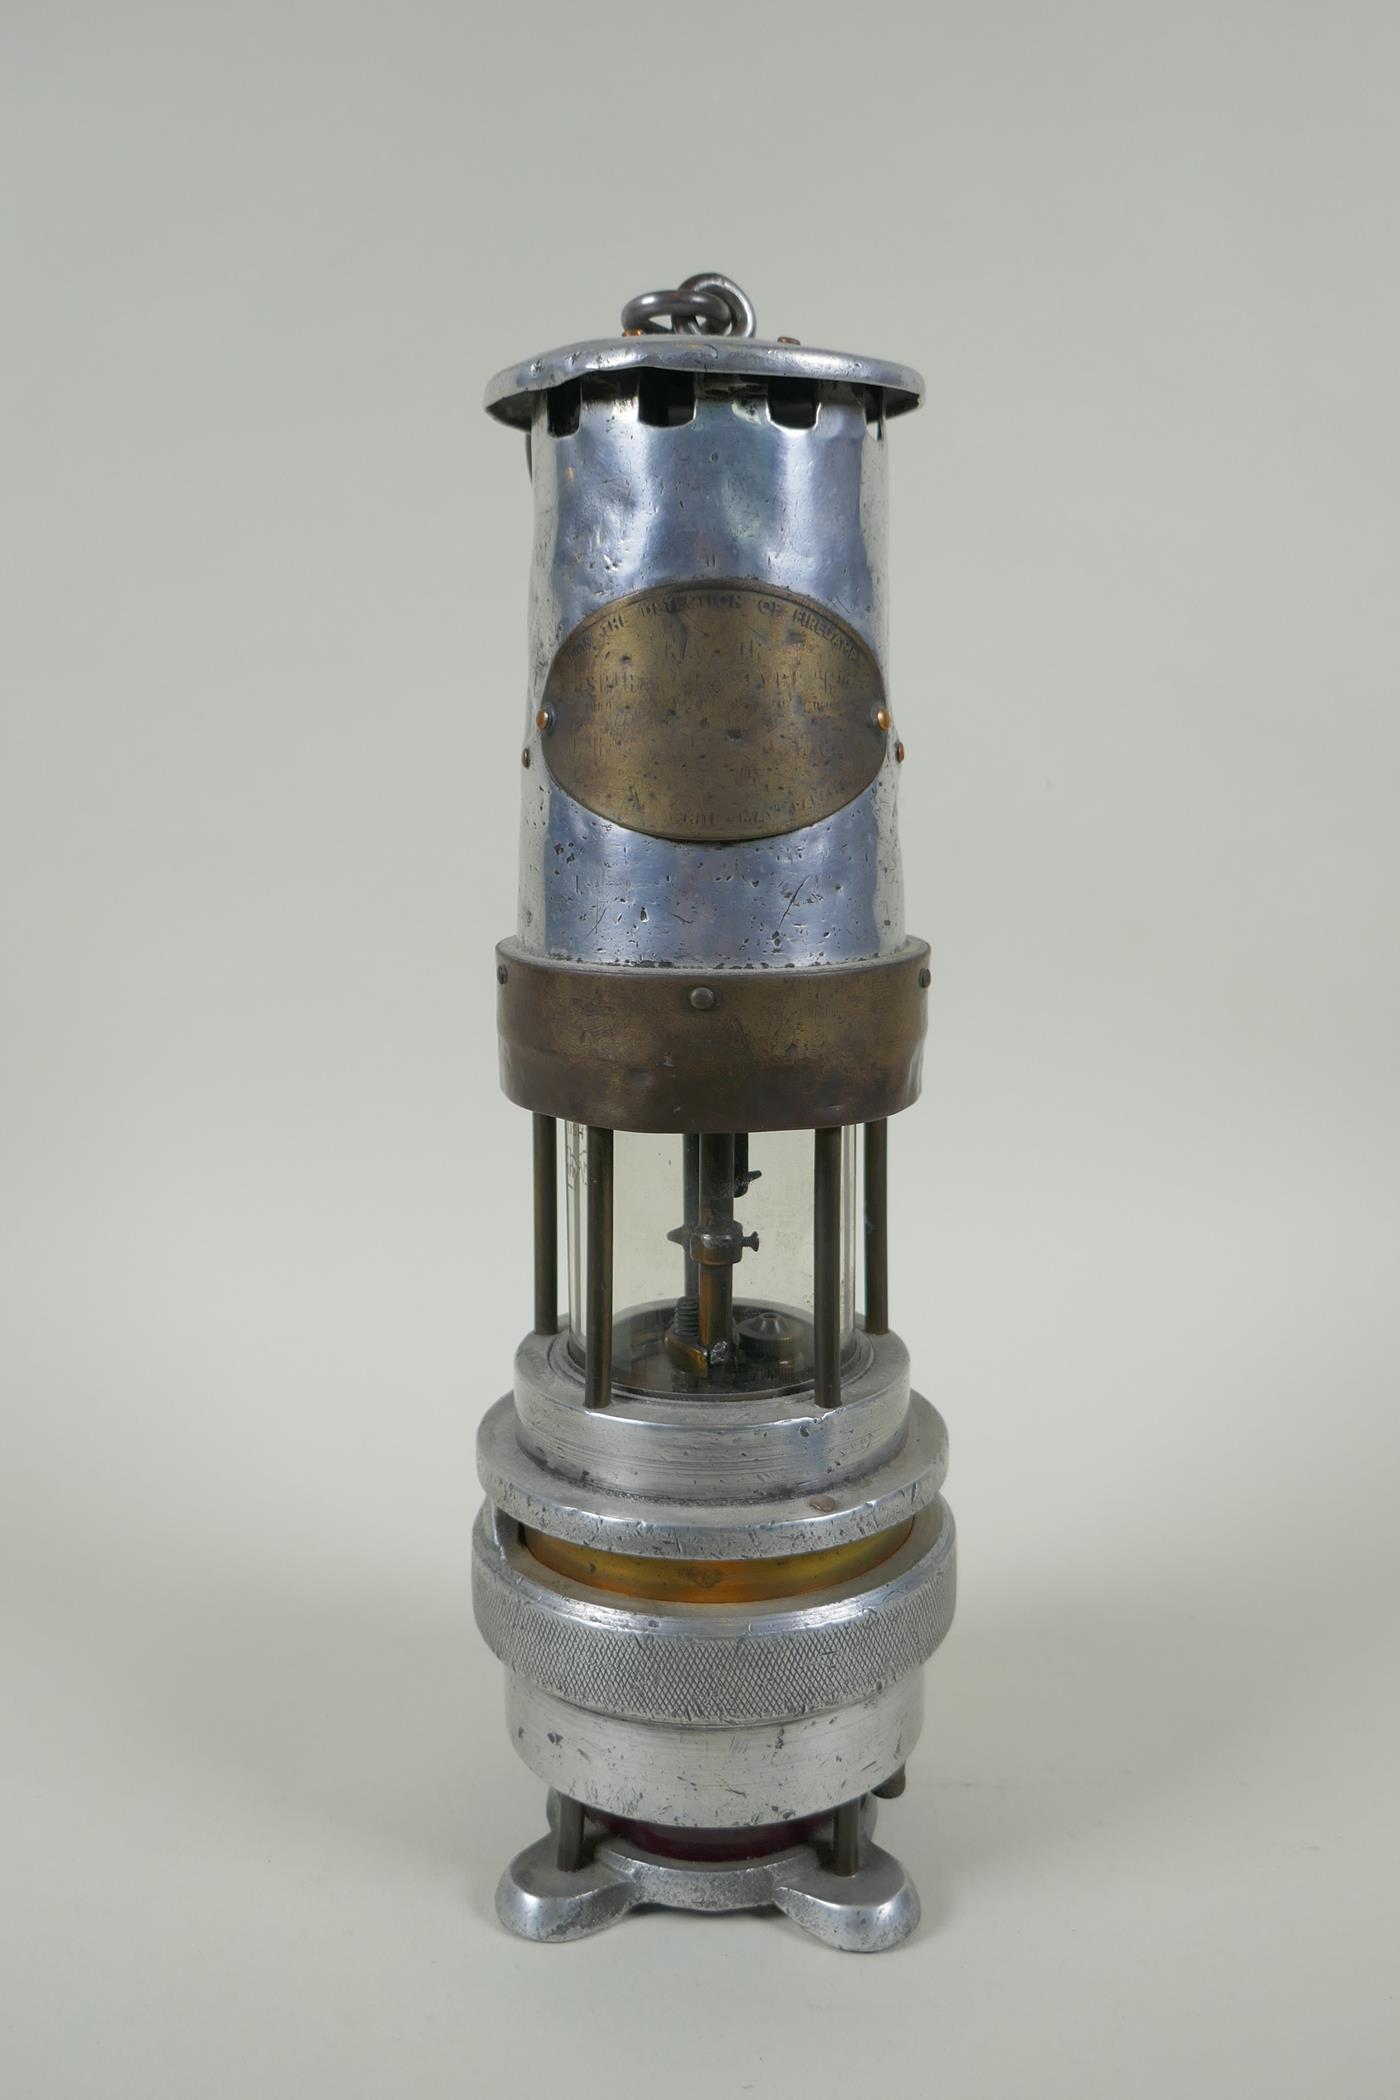 A Spiralarm Type M brass and polished metal automatic gas detector miners lamp by J. H. Naylor